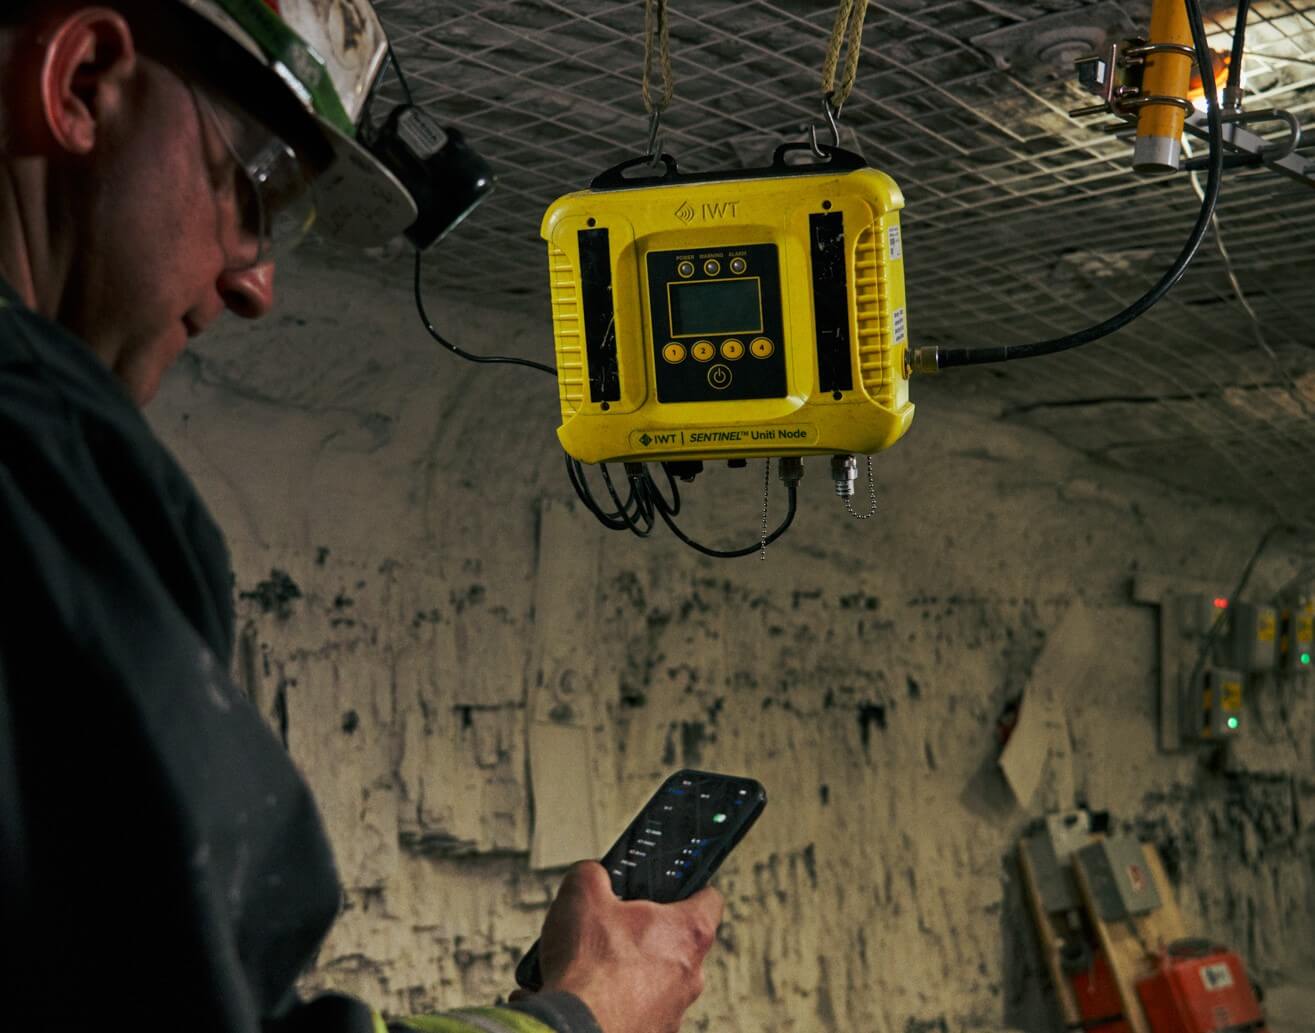 Miner checks his smartphone with Uniti device in background